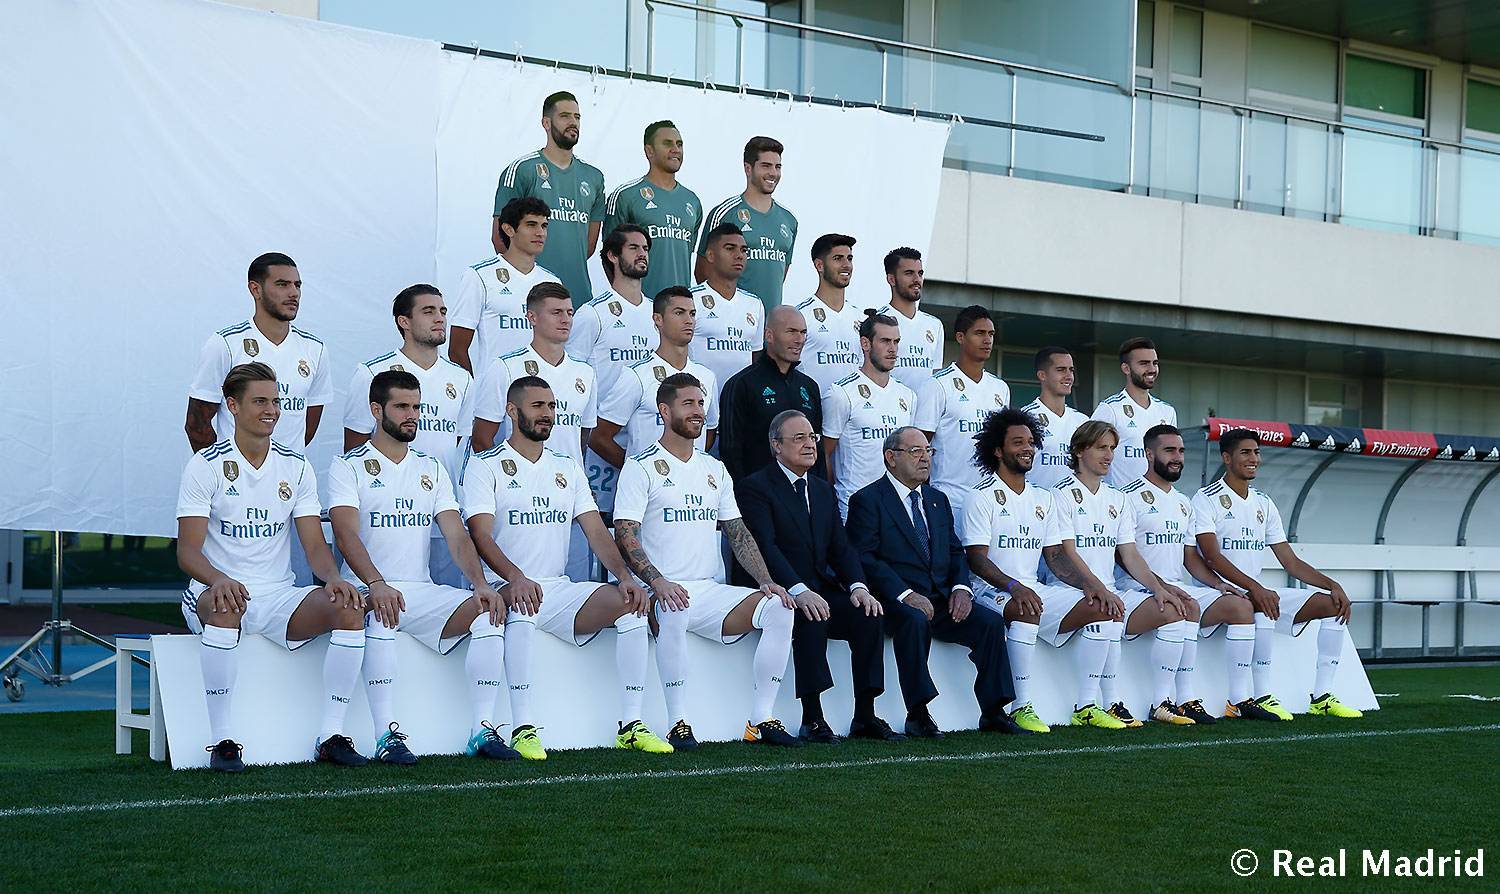 Real Madrid's official photo session - The players posed wit